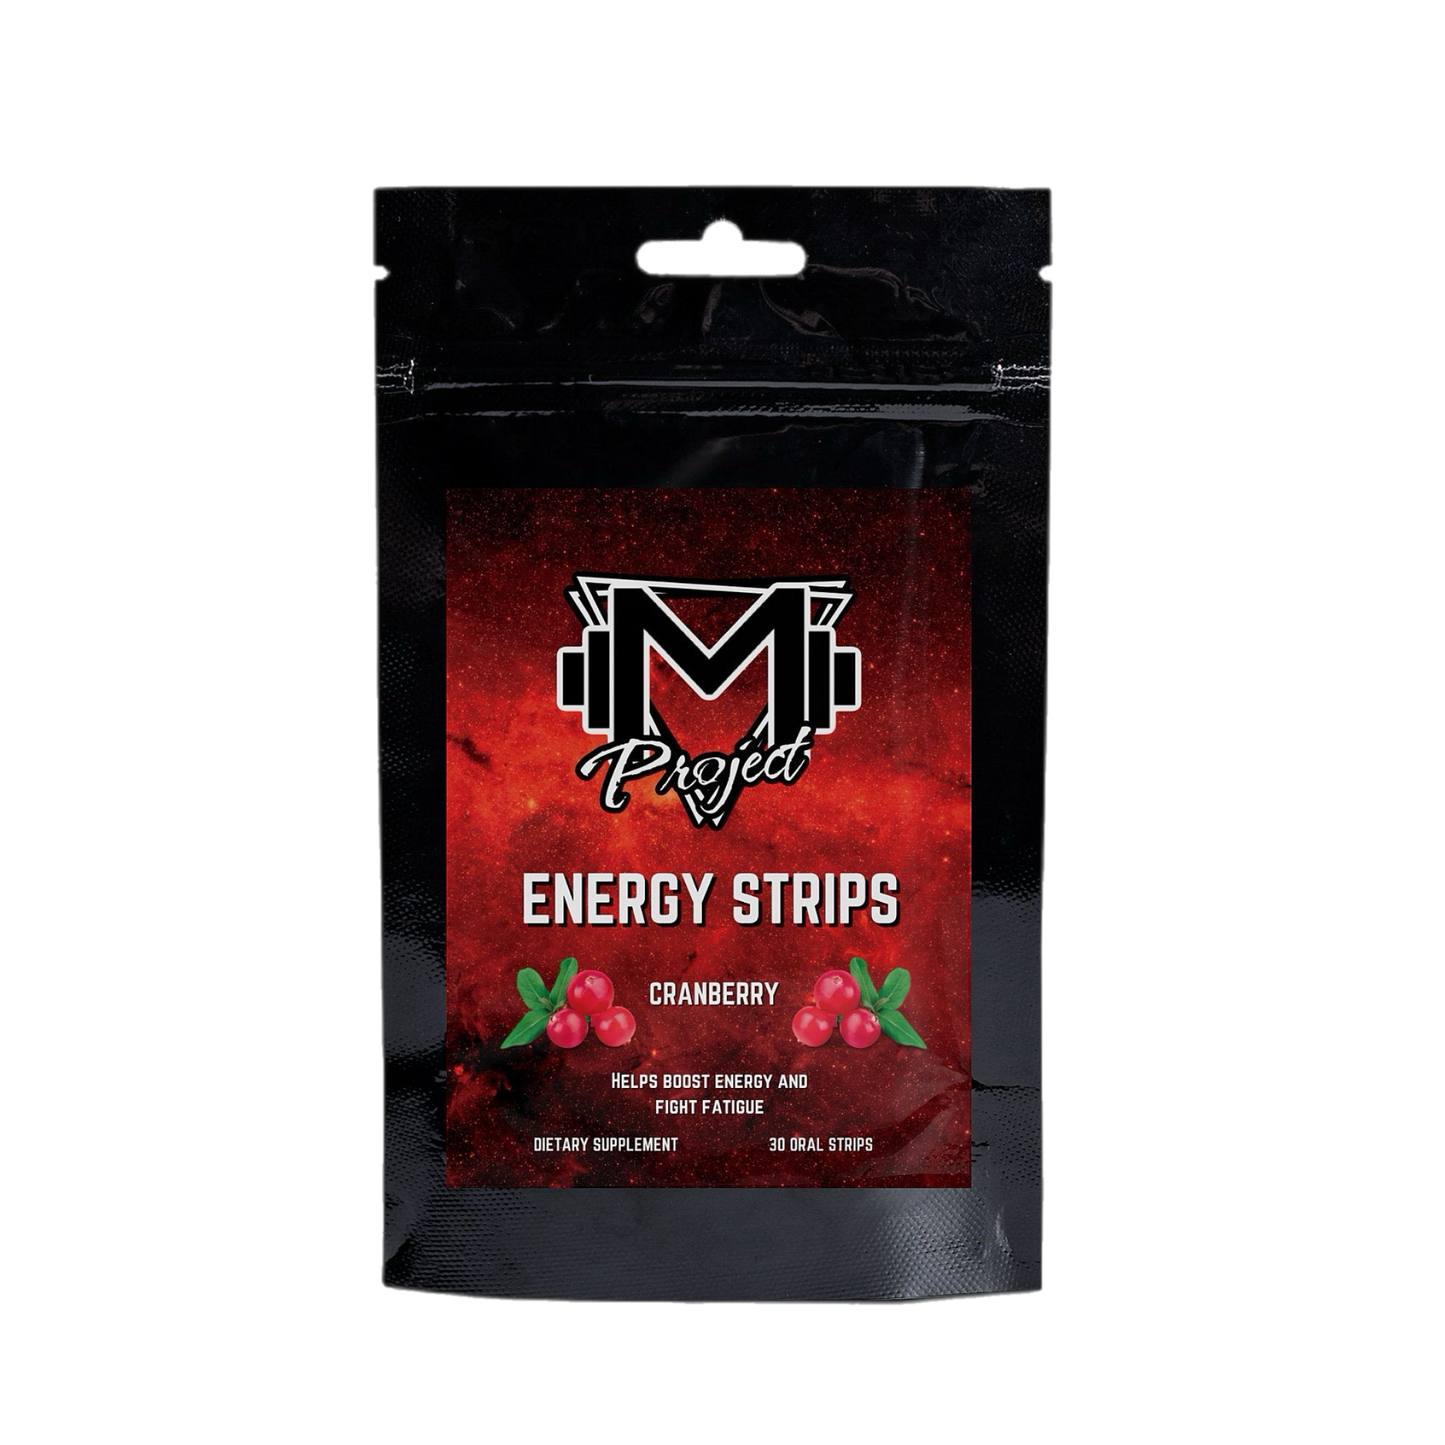 Energy Strips by Project M